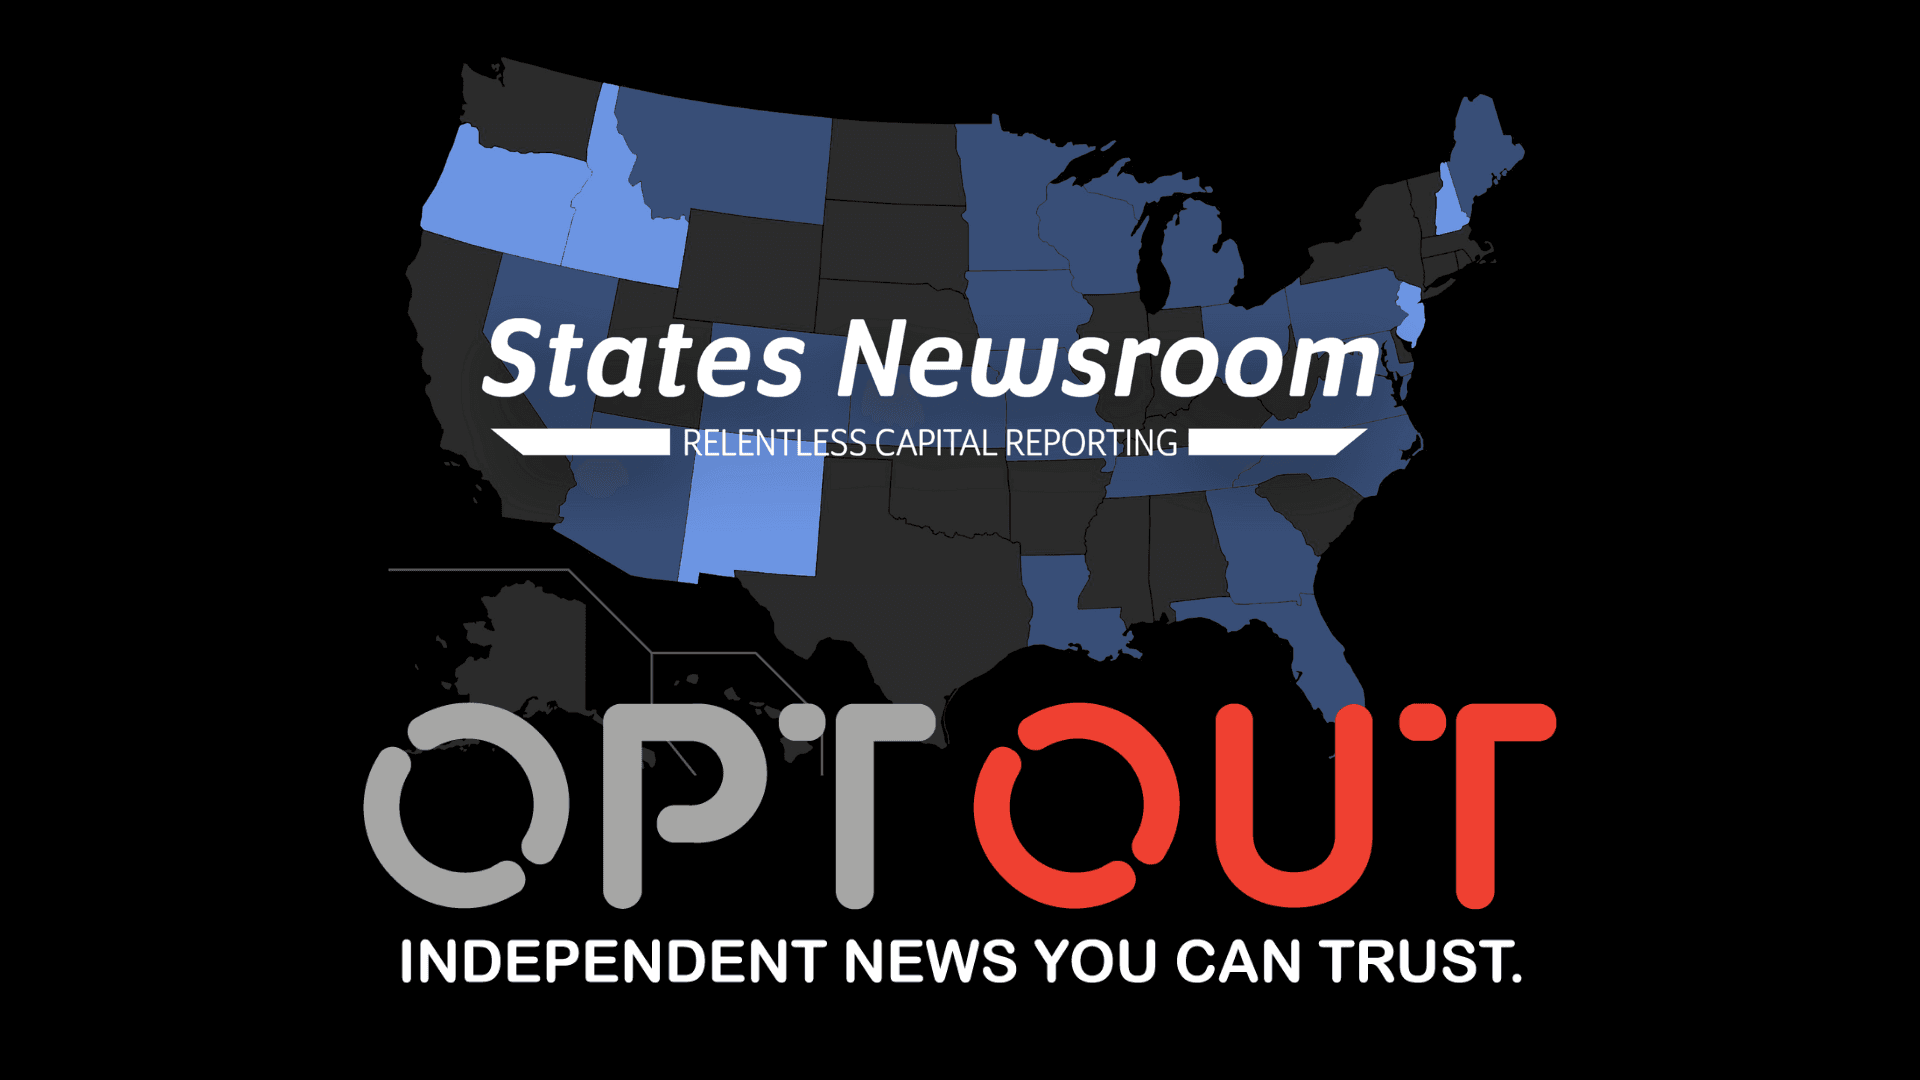 Major State News Network Joins the OptOut Independent Media Project